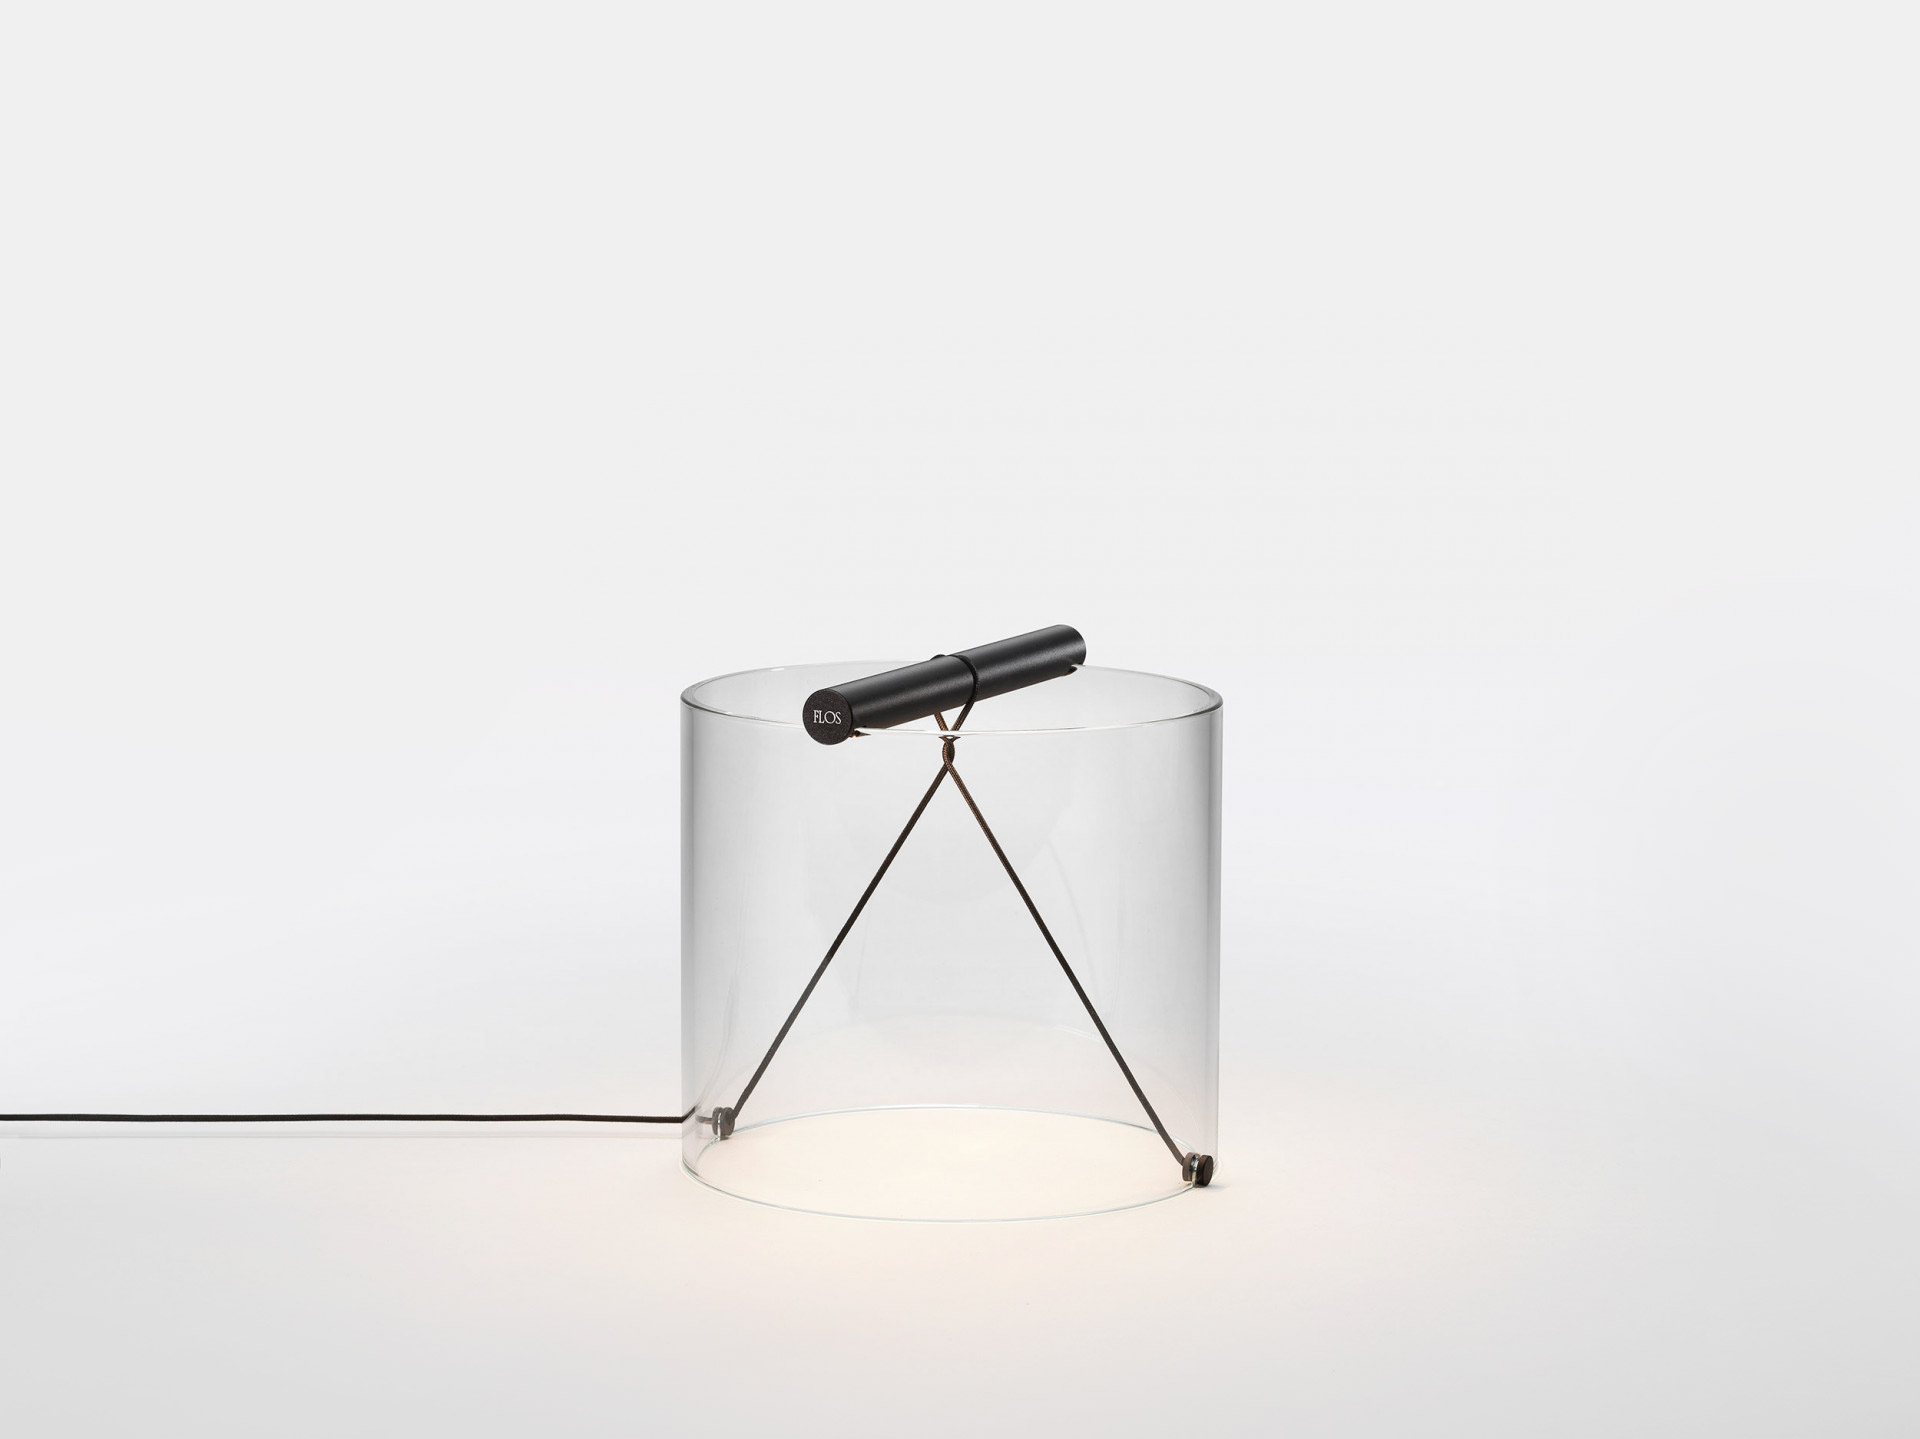 To-Tie Table Lamp made of Glass by Guglielmo Poletti